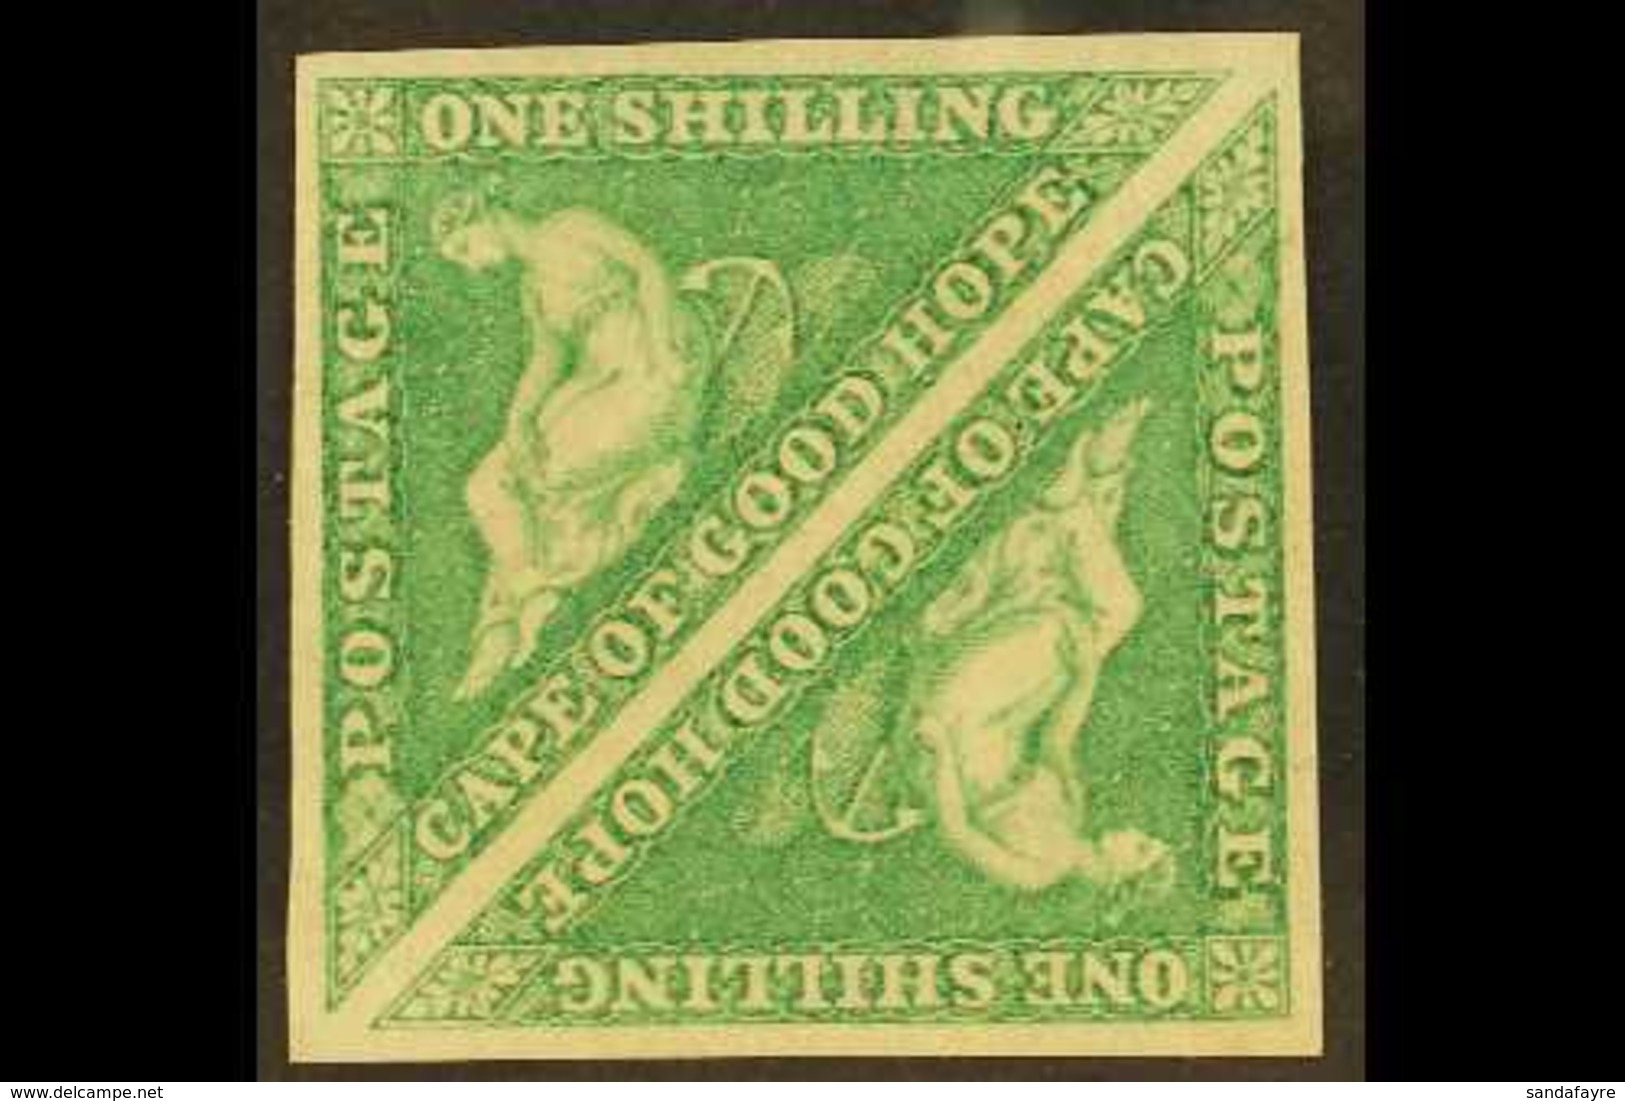 CAPE OF GOOD HOPE 1863 1s Bright Emerald Green, DLR Printing, SG 21, Superb Mint Square Pair With Large Margins All Roun - Non Classificati